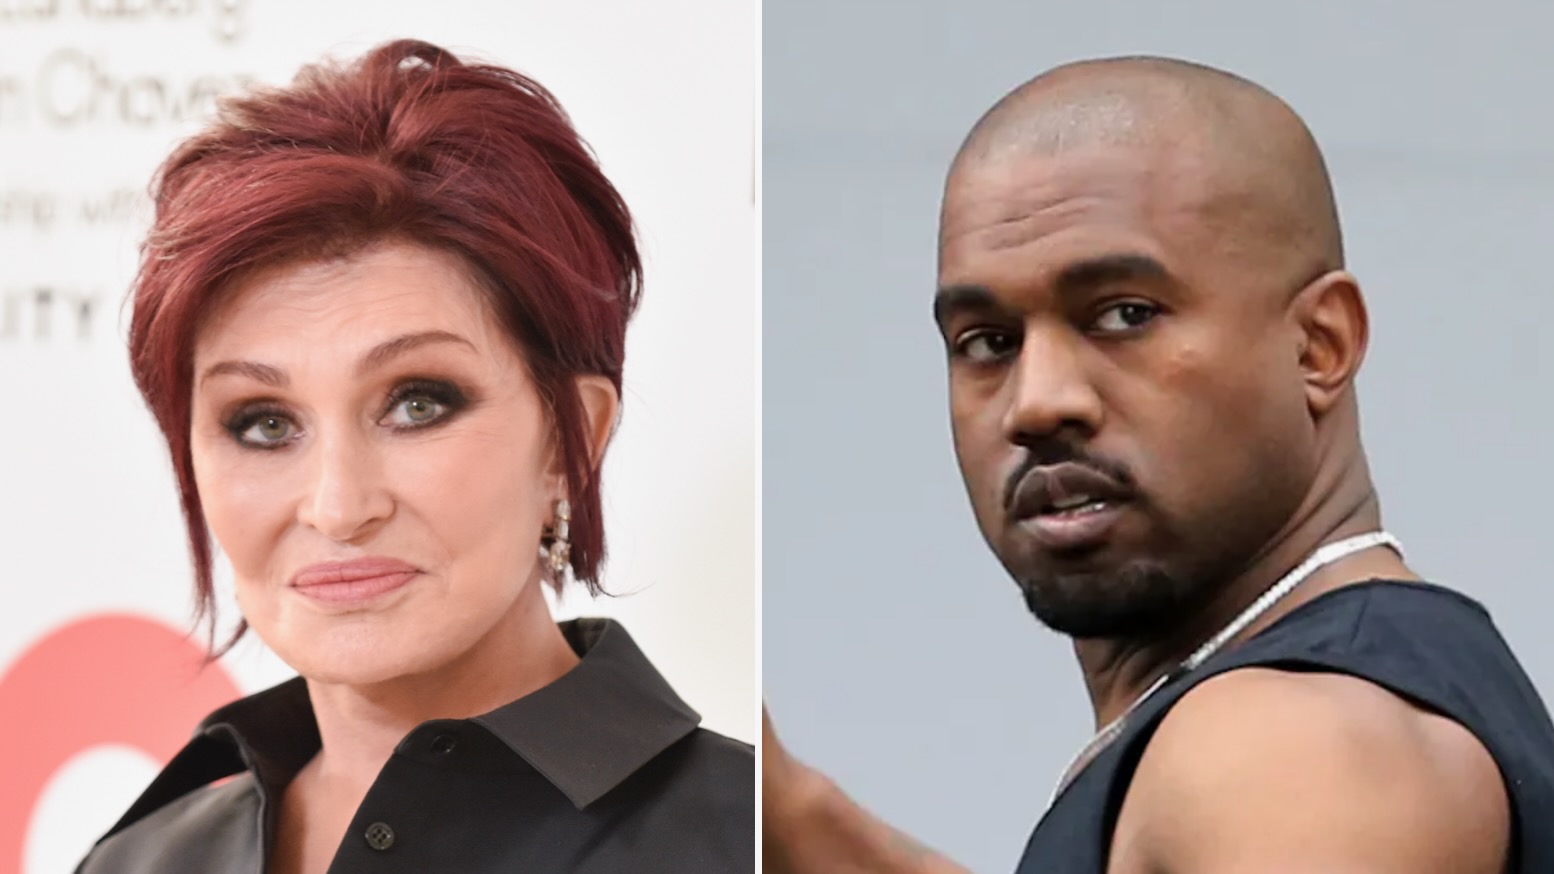 Sharon Osbourne to Kanye West: You “F*cked with the Wrong Jew This Time”